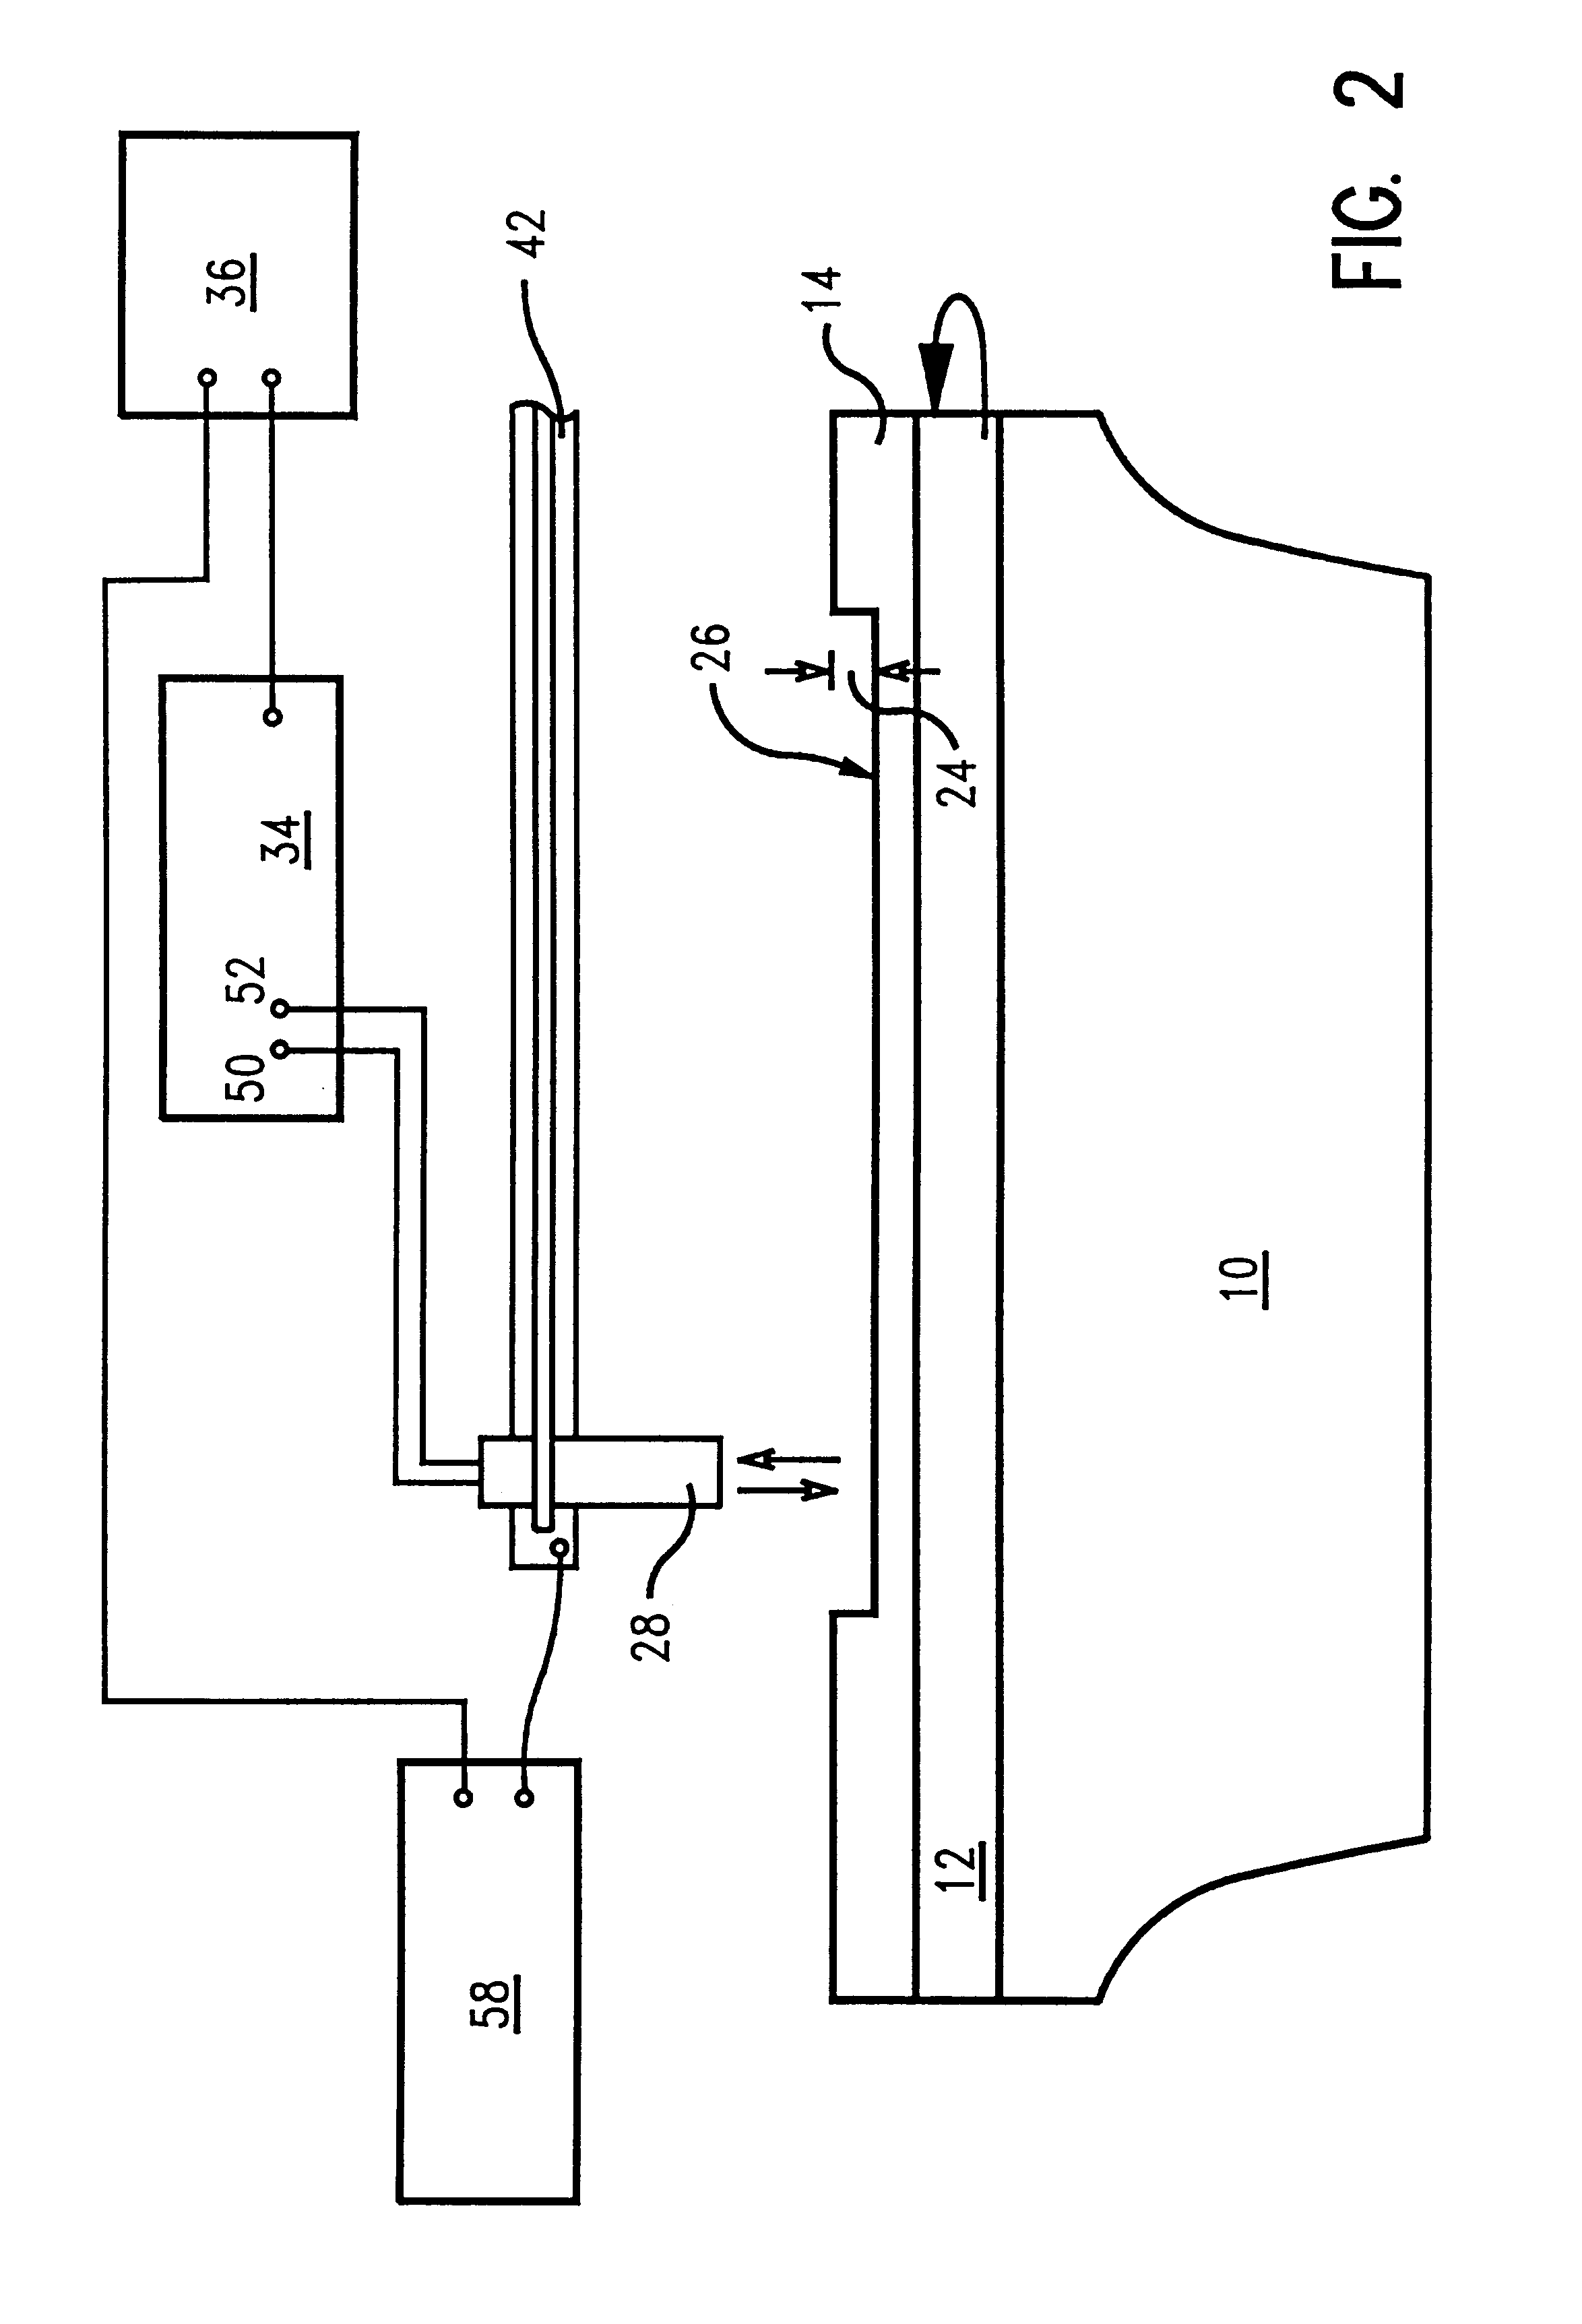 Method and apparatus for monitoring polishing pad wear during processing